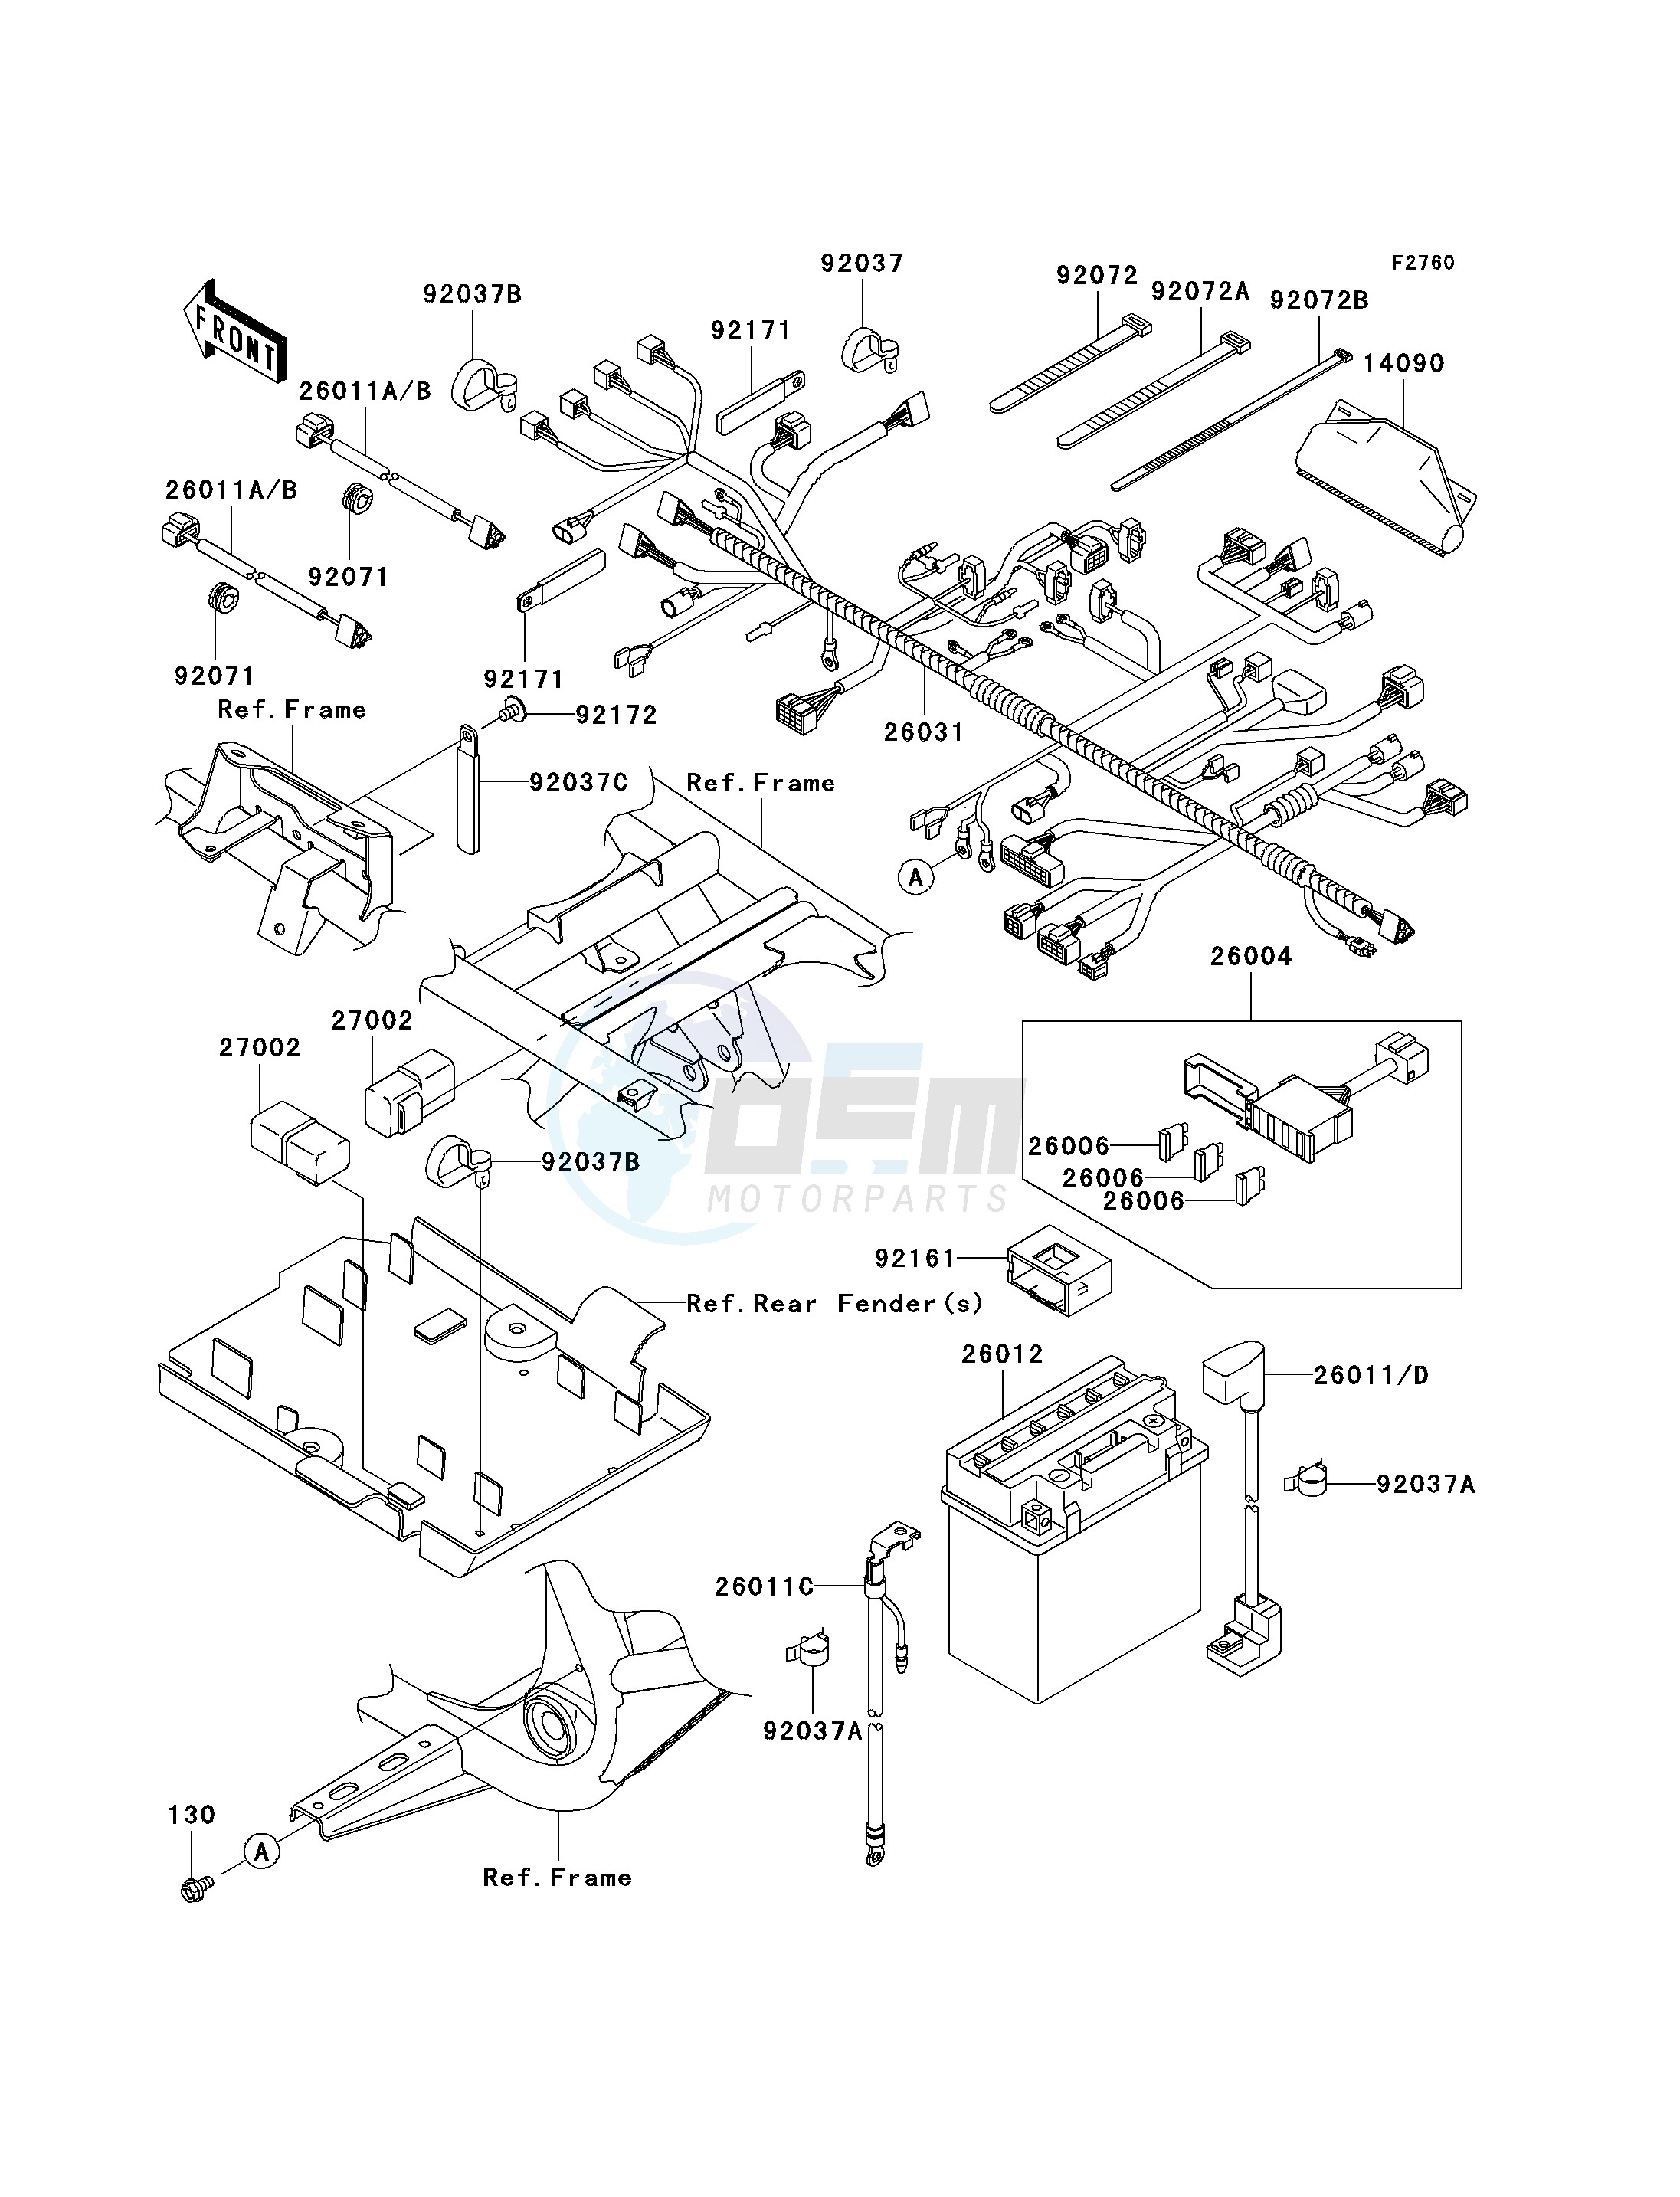 CHASSIS ELECTRICAL EQUIPMENT image